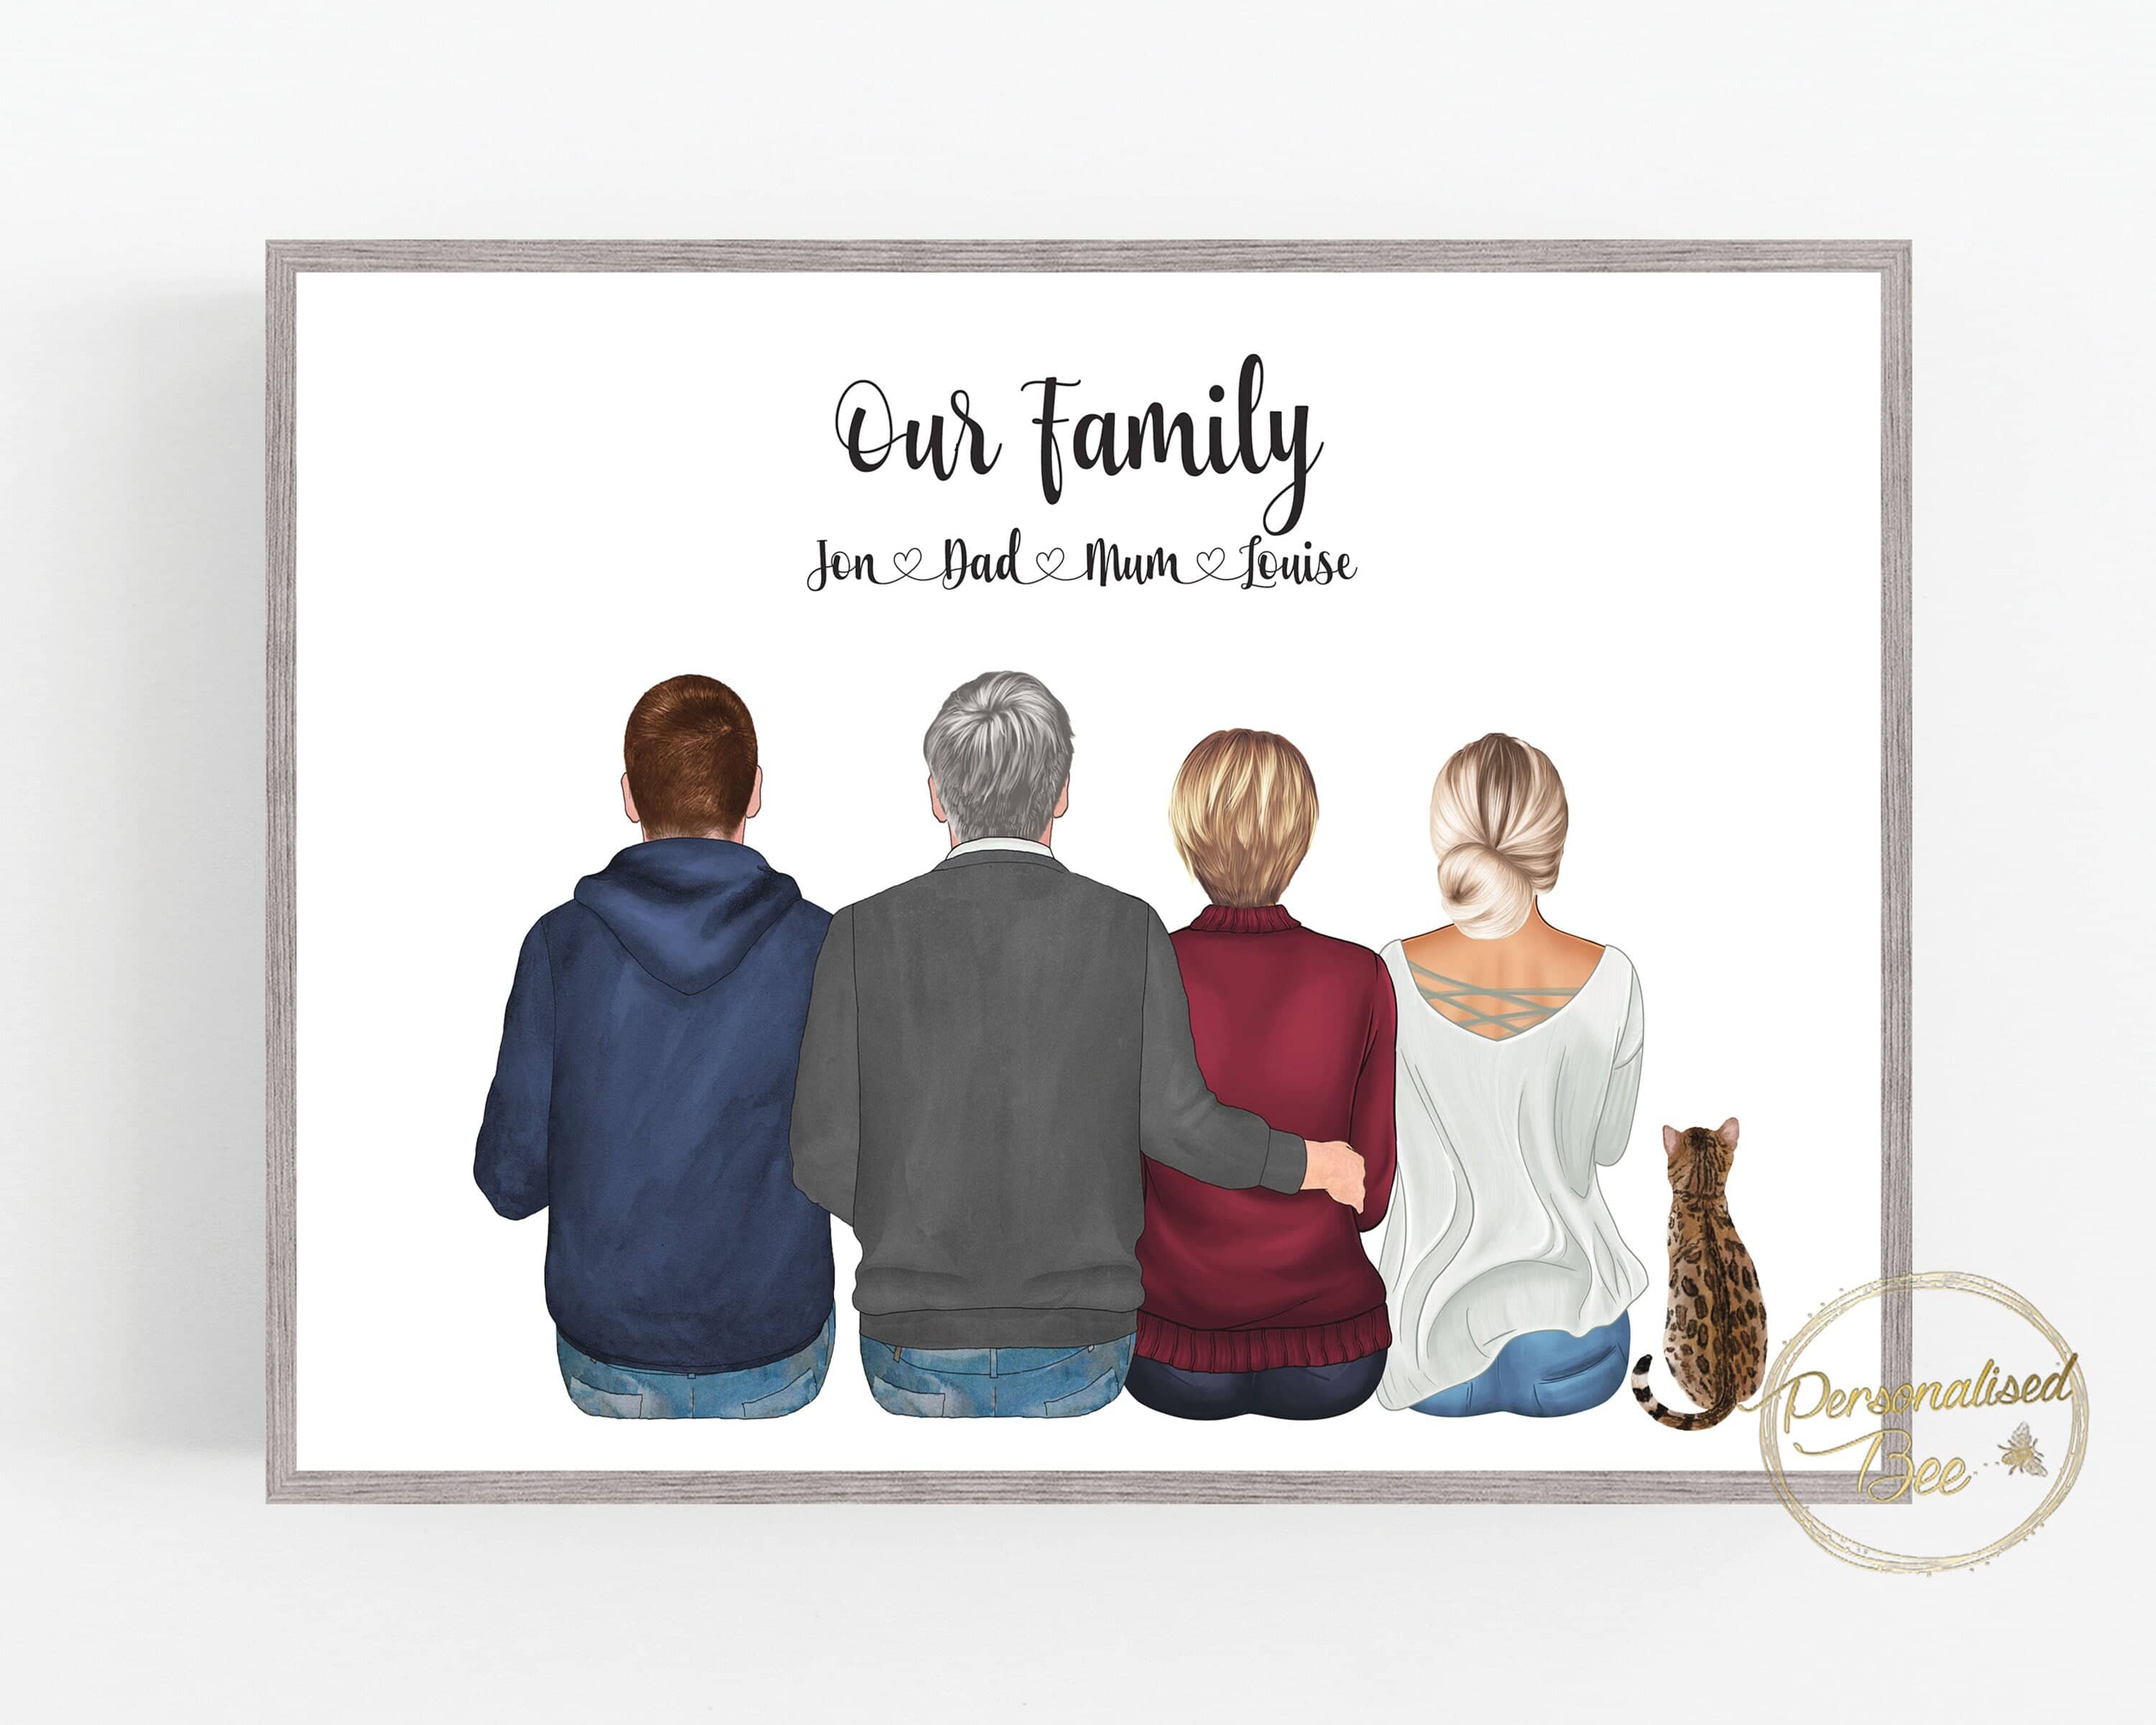 Personalised Family Pet Print, Christmas gifts for mum, Our Family, Christmas Gifts, Couples Gift, Custom Portrait, Anniversary Gift